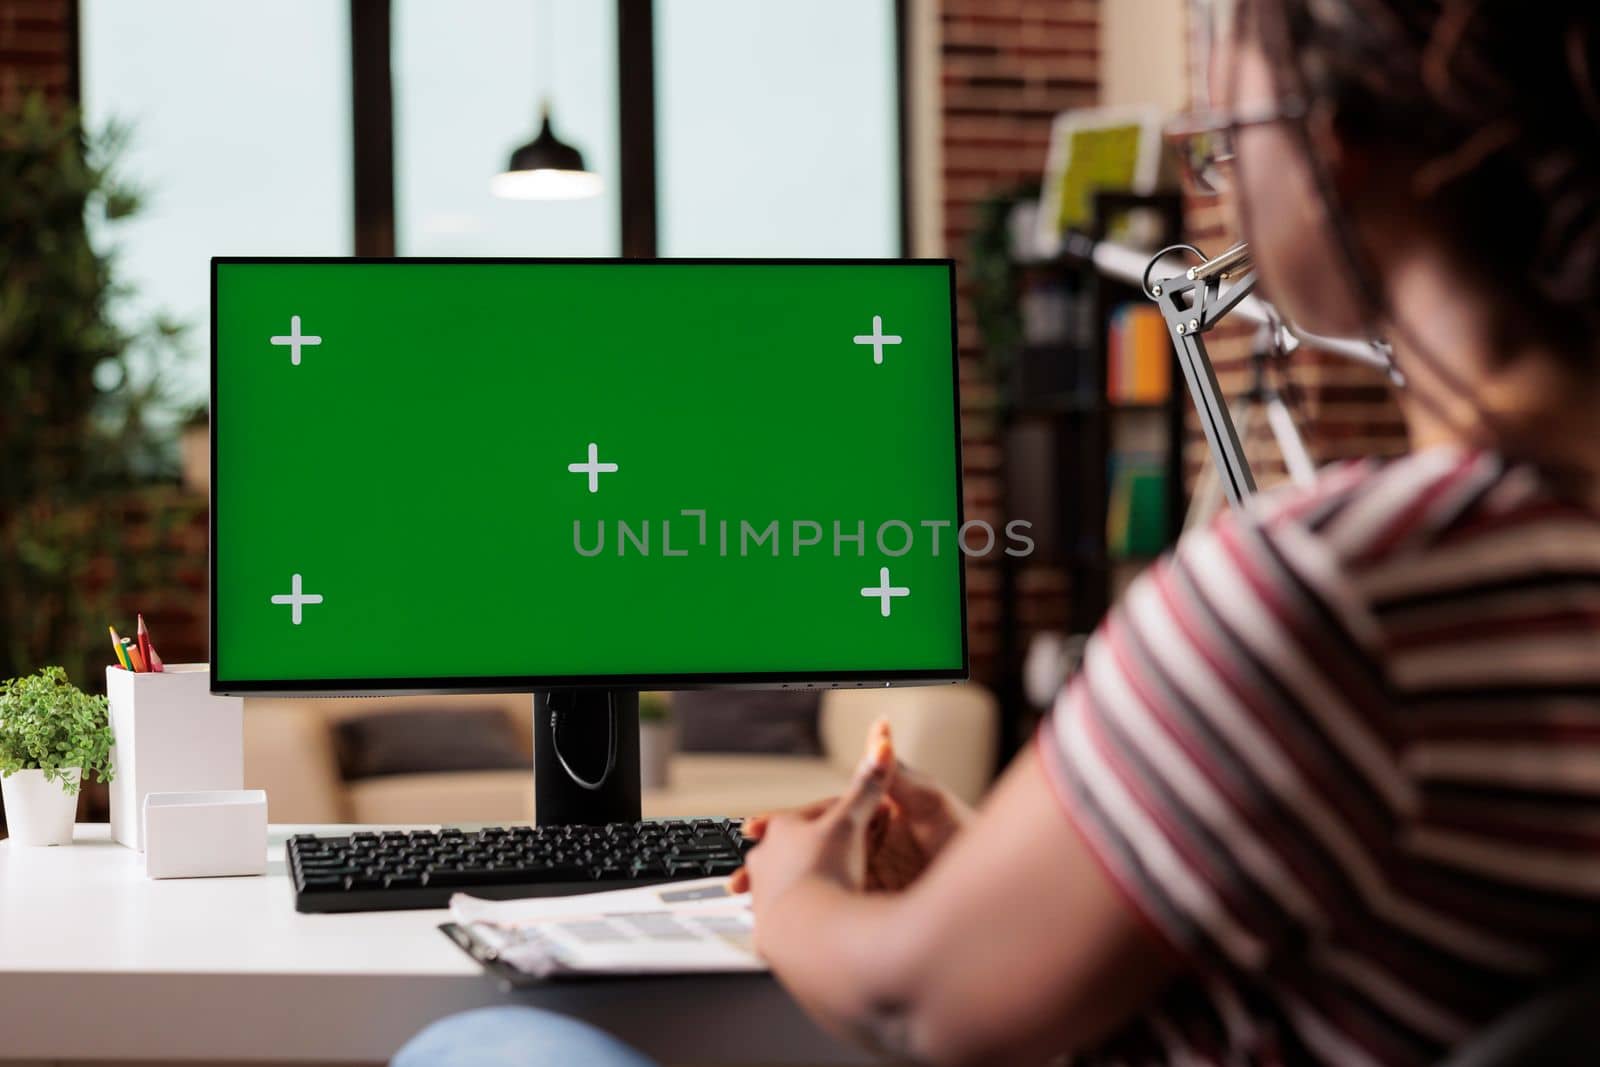 Remote worker computer with green screen at home office table, focus on pc monitor mock up. Woman working, sitting at workplace desk, employee professional equipment with chroma key display